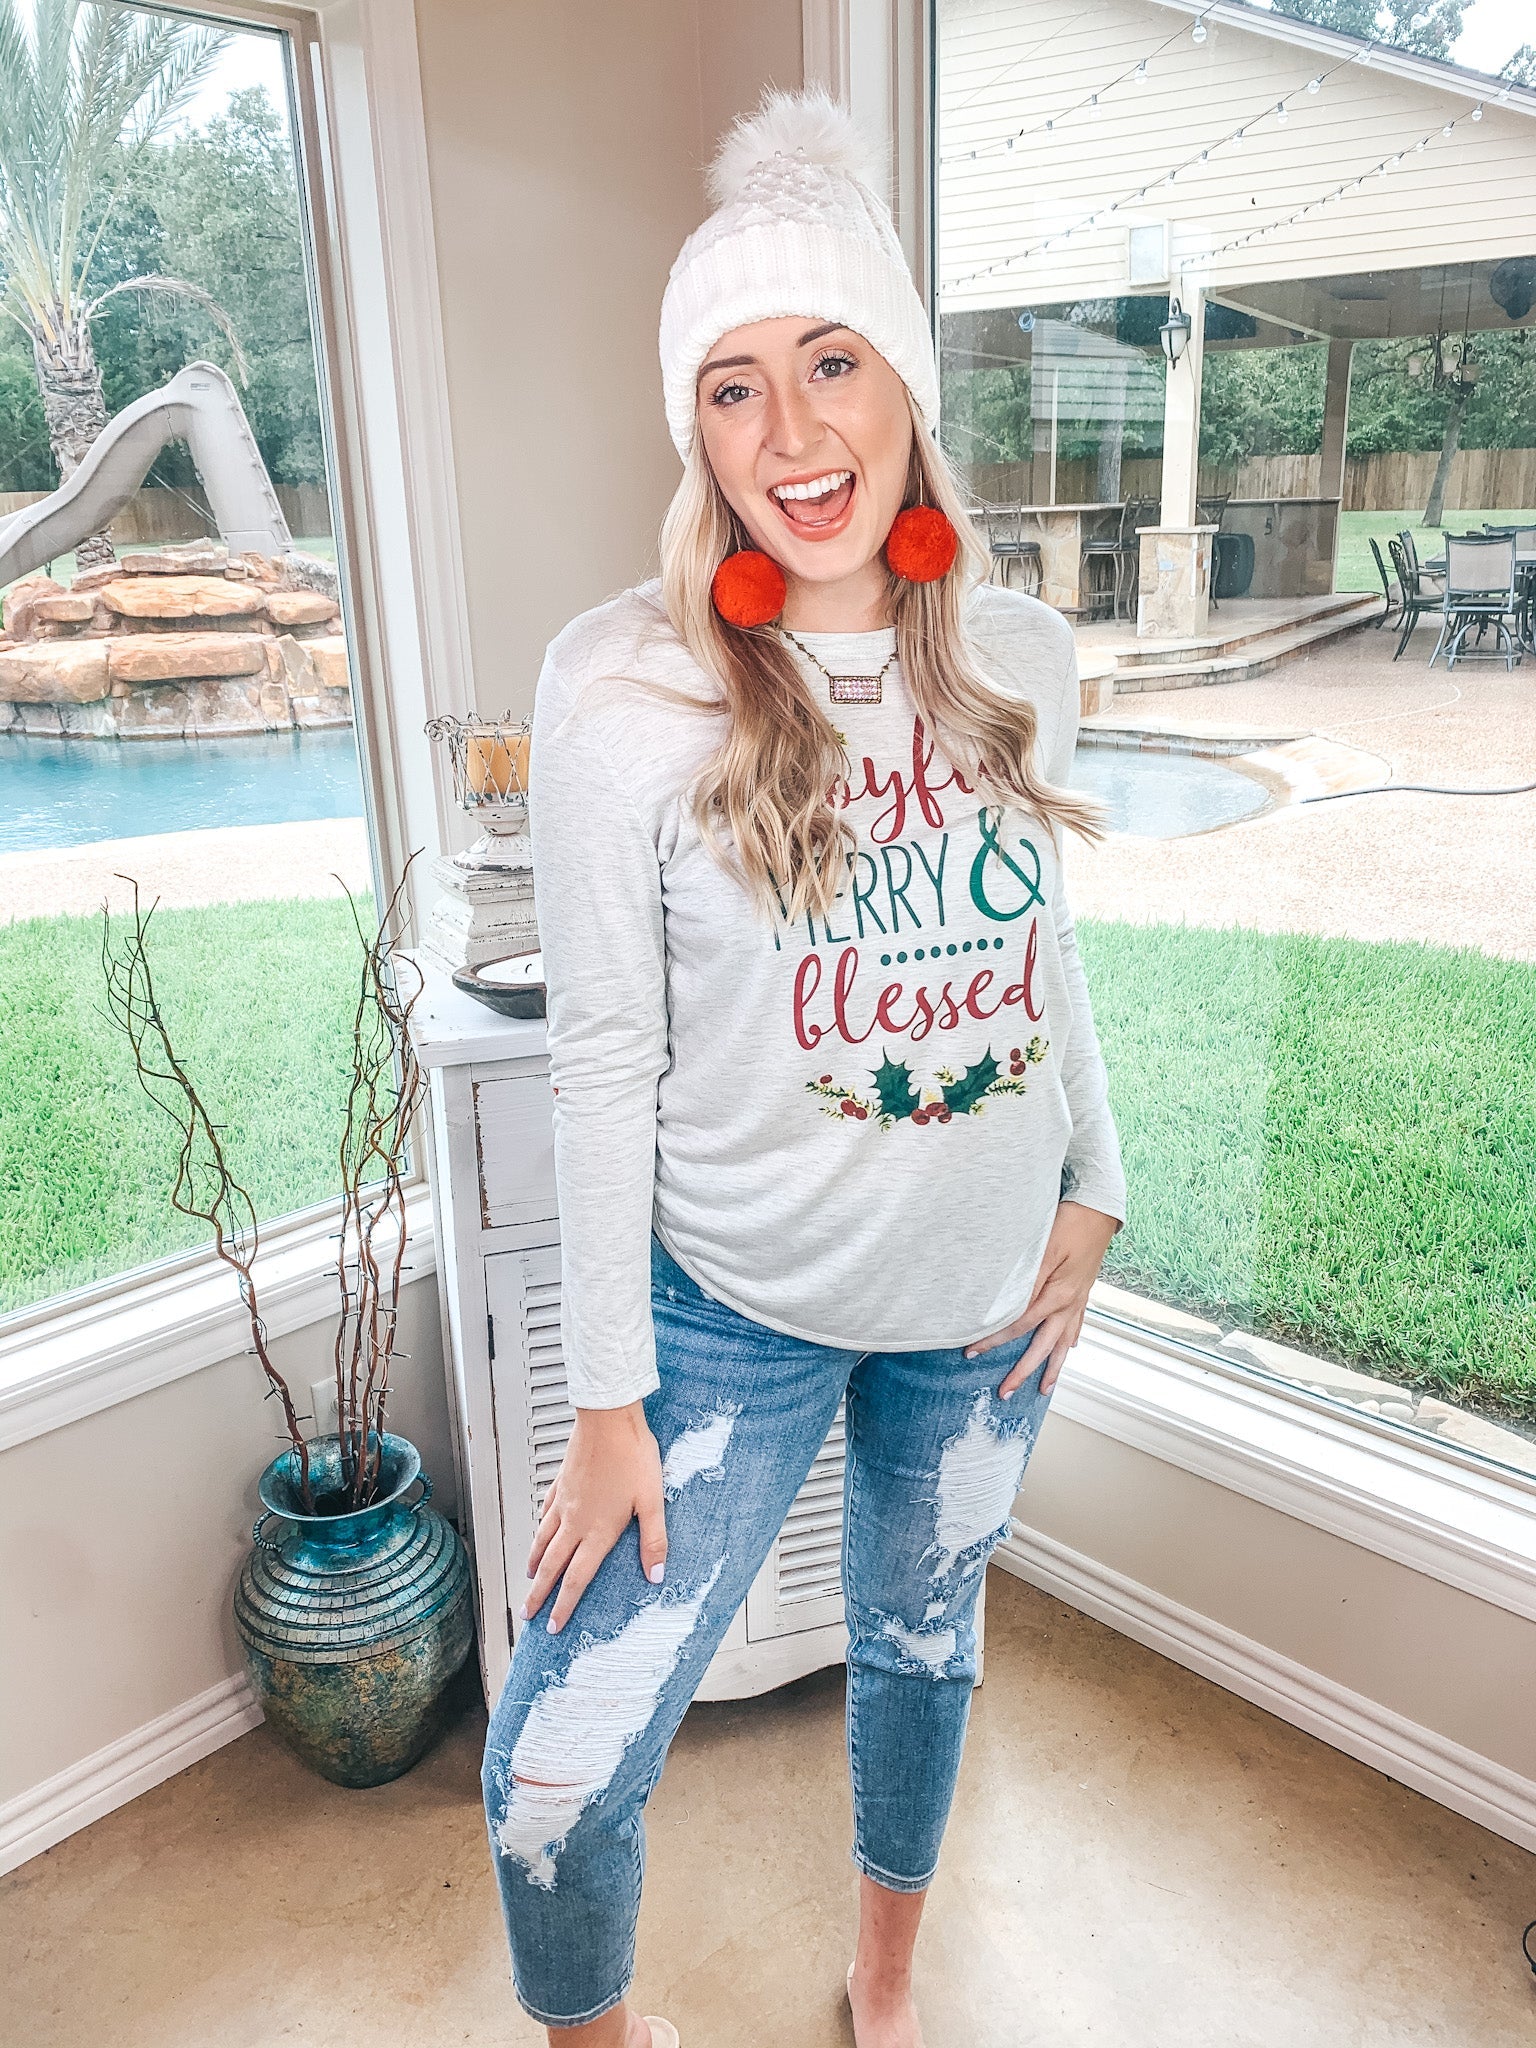 Joyful, Merry, & Blessed Grey Long Sleeve Tee with Candy Cane Elbow Patches - Giddy Up Glamour Boutique